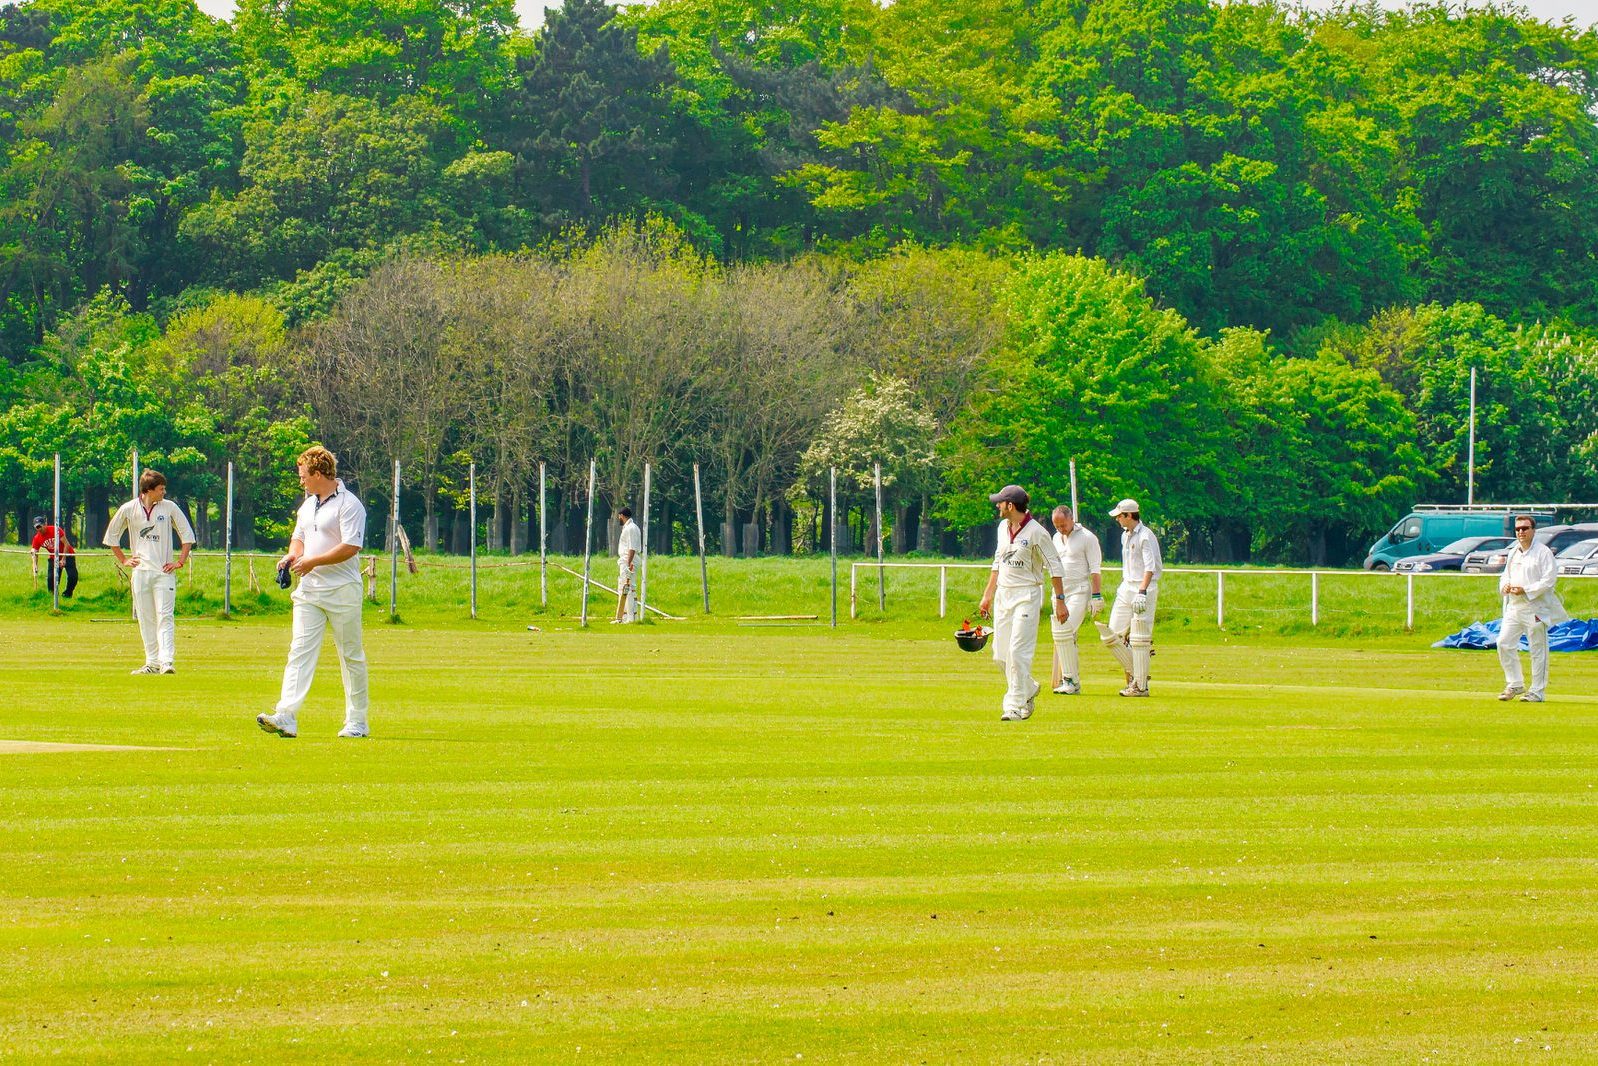 TWO CRICKET CLUBS IN PHOENIX PARK NEAR THE WELLINGTON MONUMENT 008